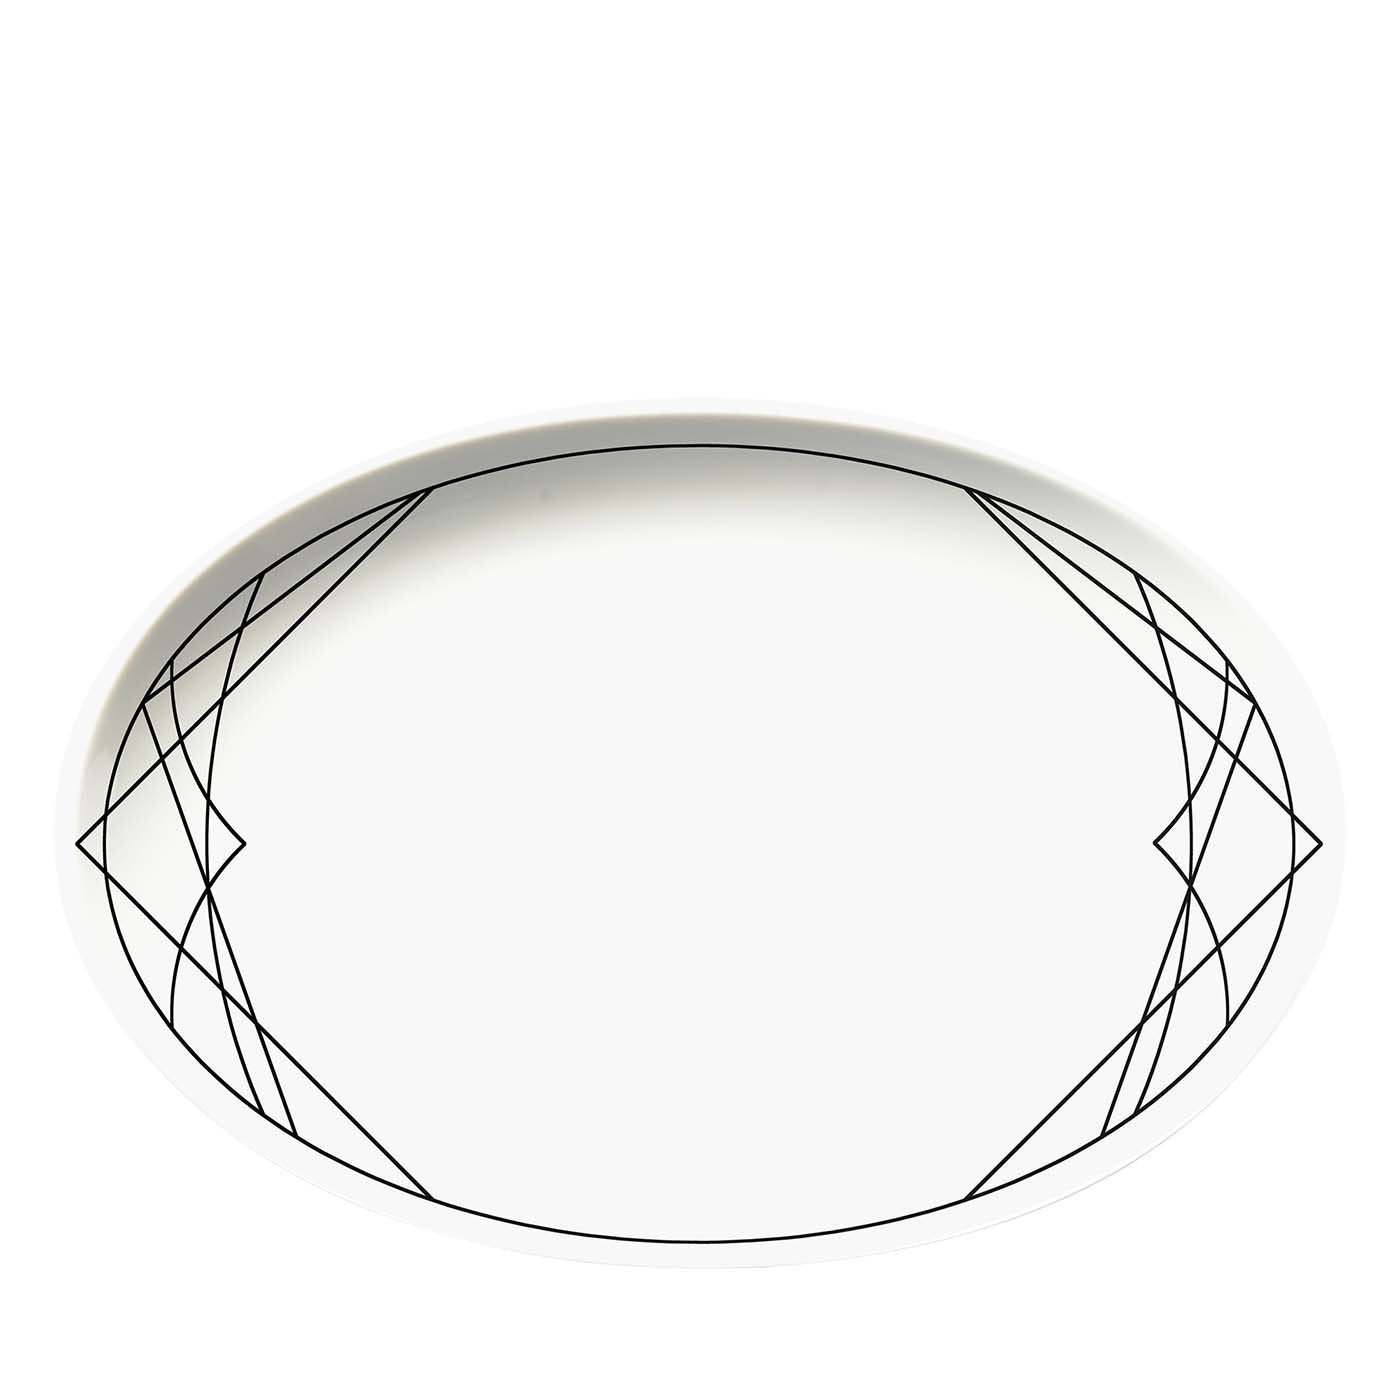 Baroqeat Black Oval Tray by Salvatore Spataro - Main view